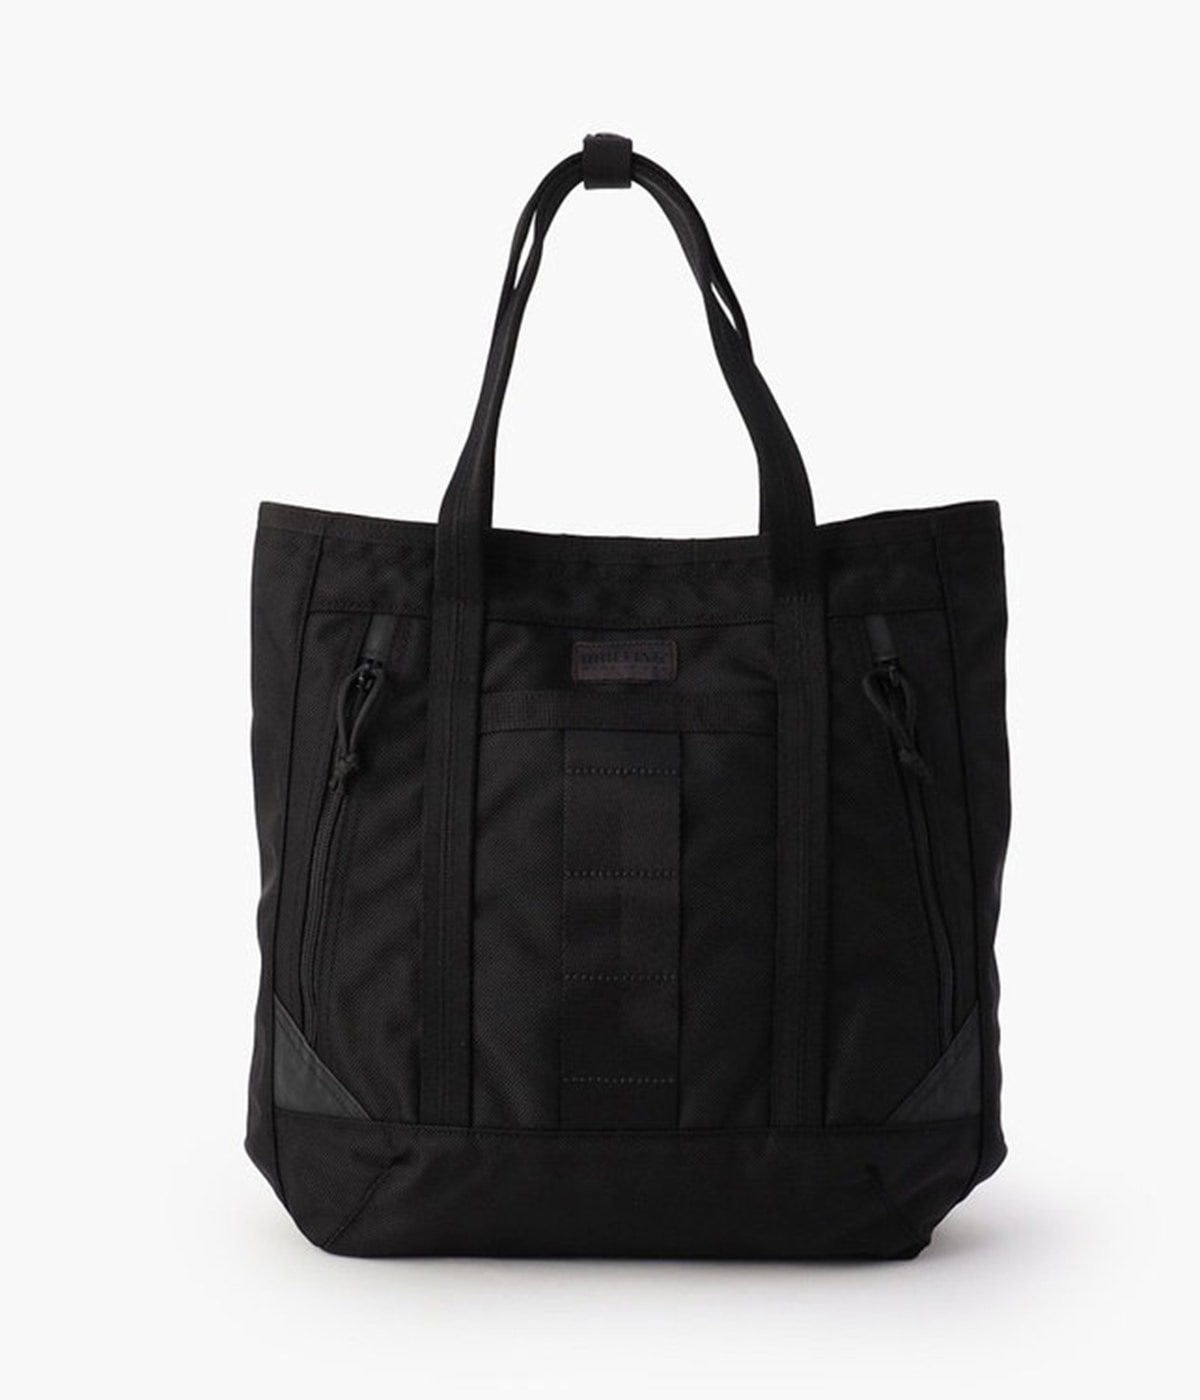 DELTA MASTER TOTE TALL | BRIEFING(ブリーフィング) / バッグ